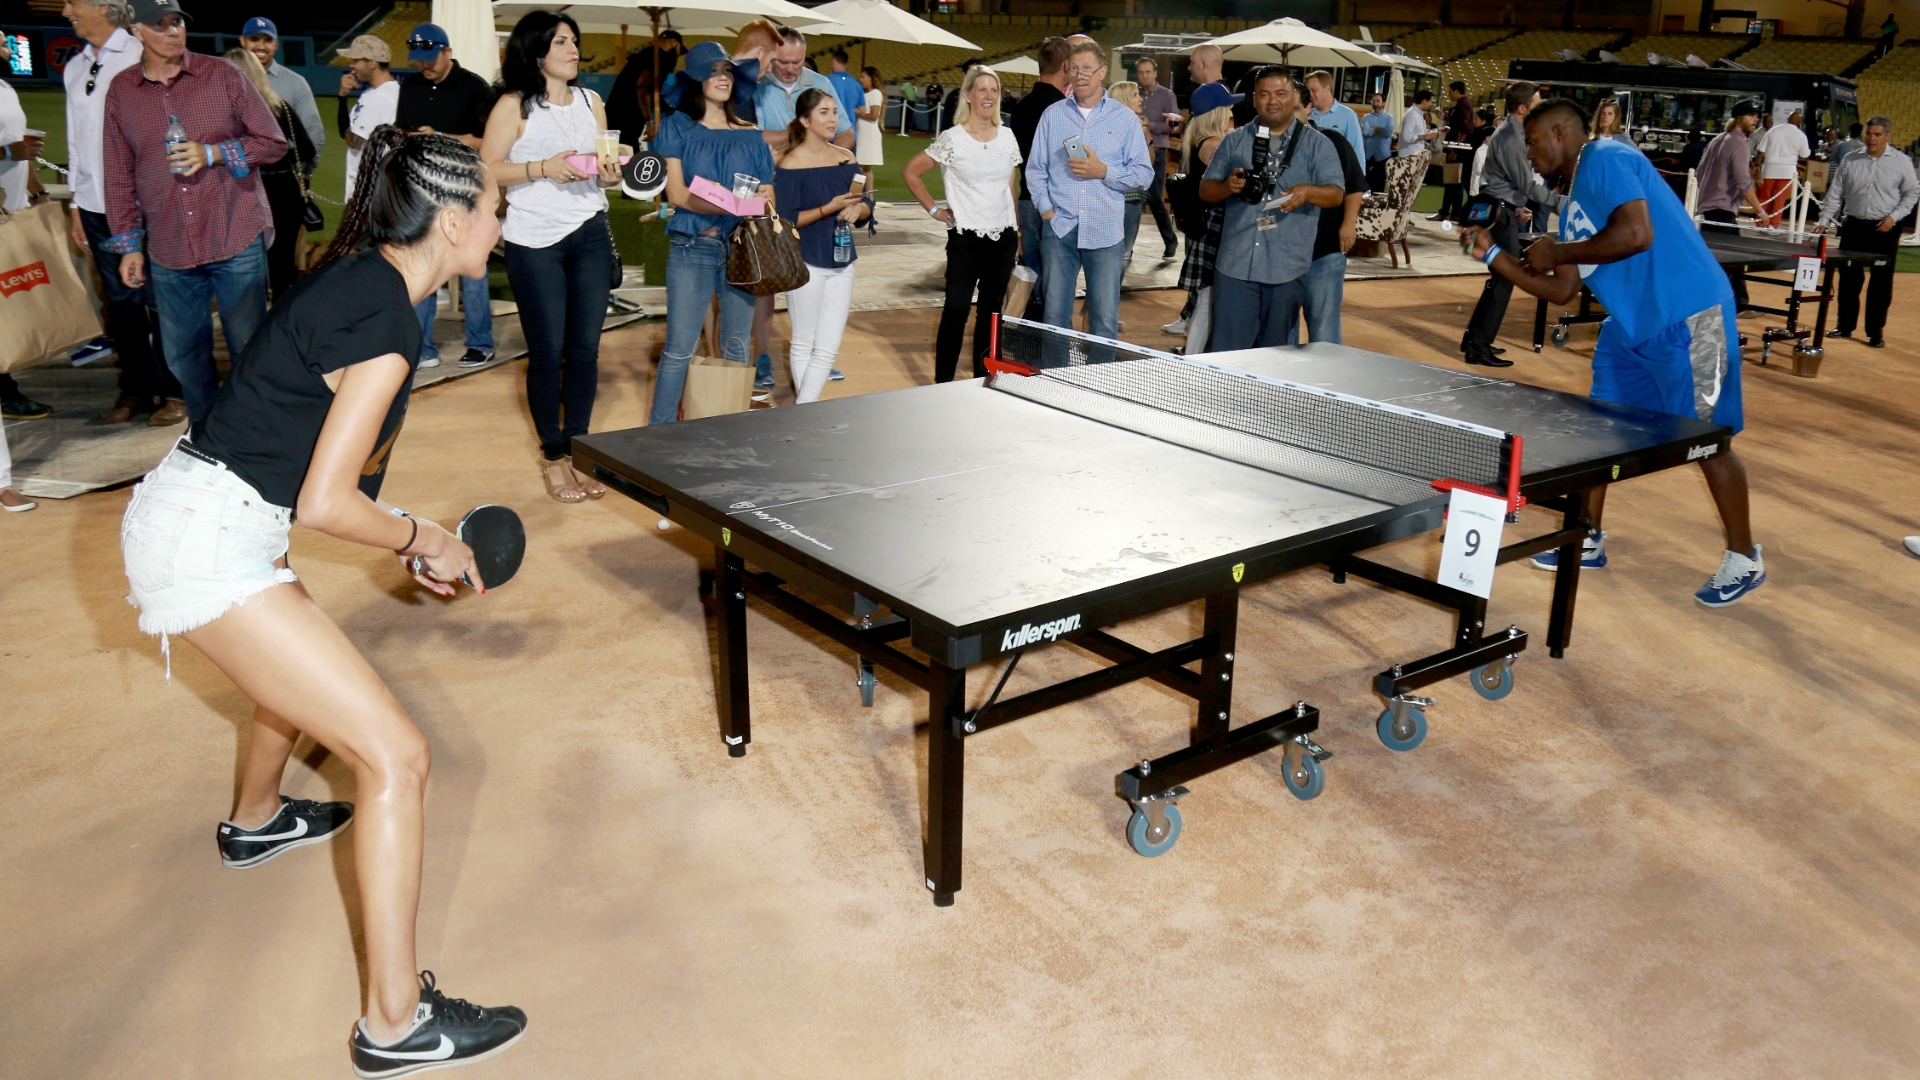 Kershaw hosts charity ping pong event - Stream the Video